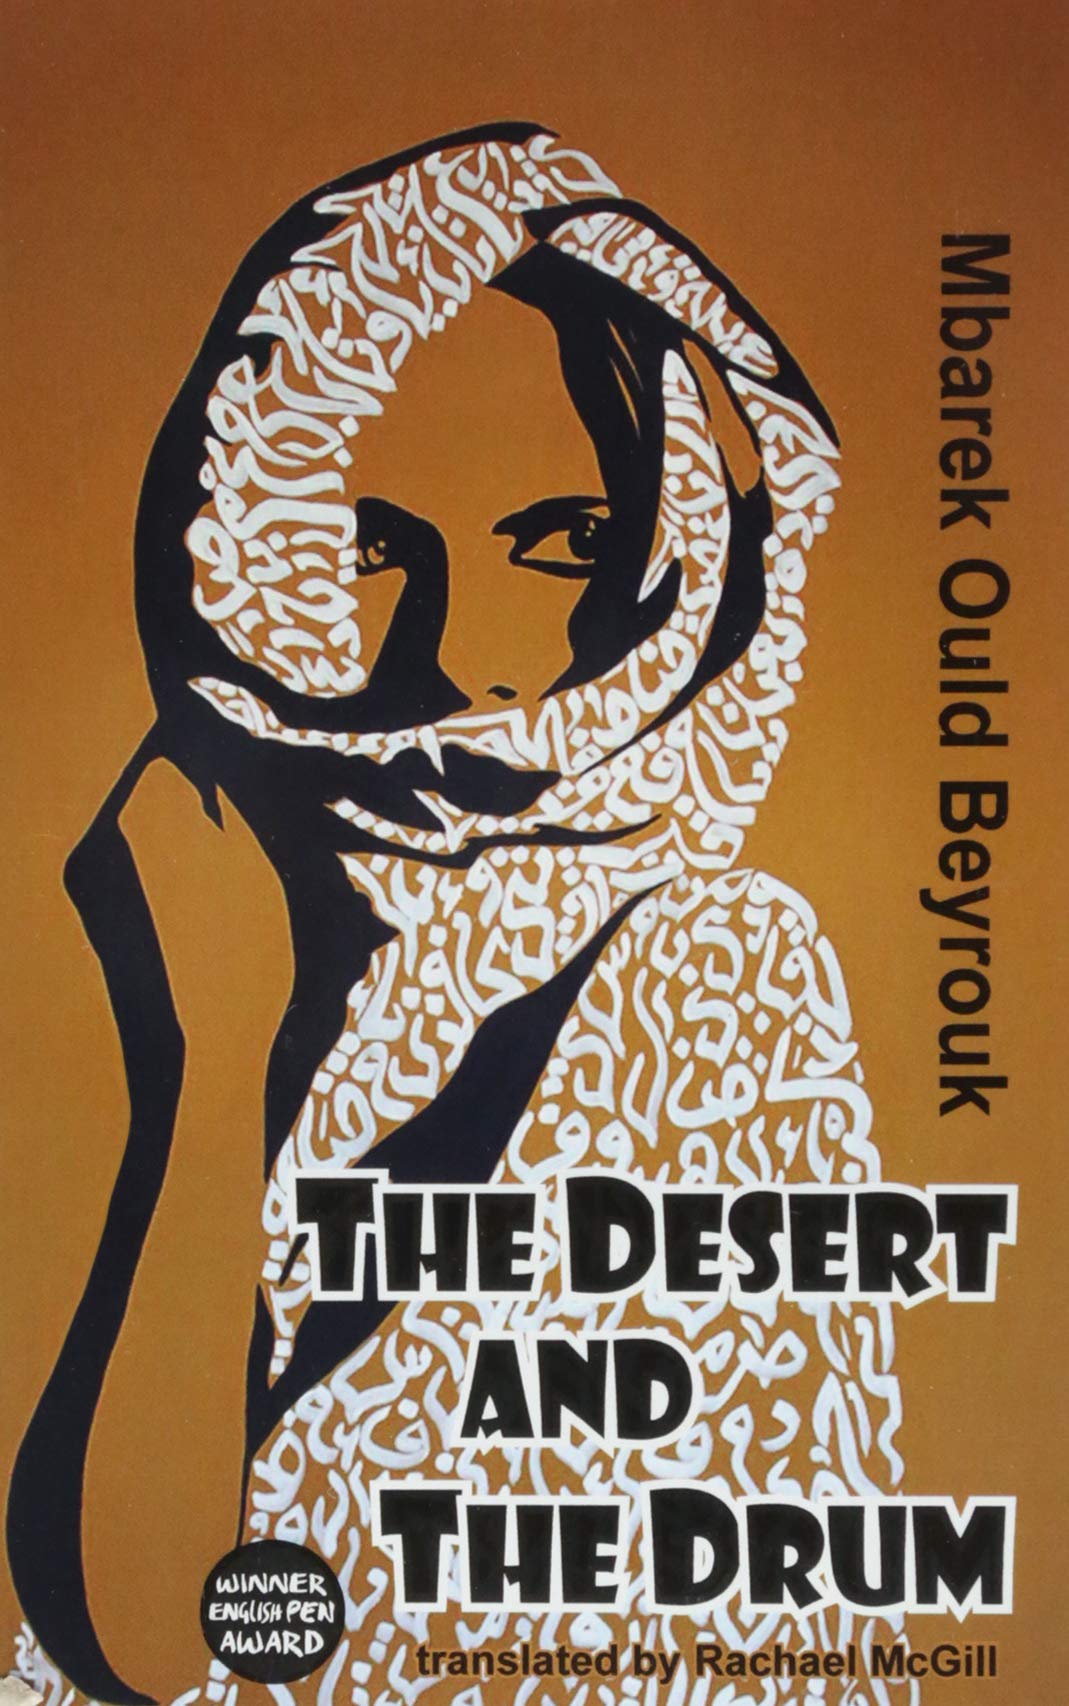 Cover of Mbarek Ould Beyroukʹs "The Desert and the Drum", translated from the French by Rachael McGill (published by Dedalus Ltd)